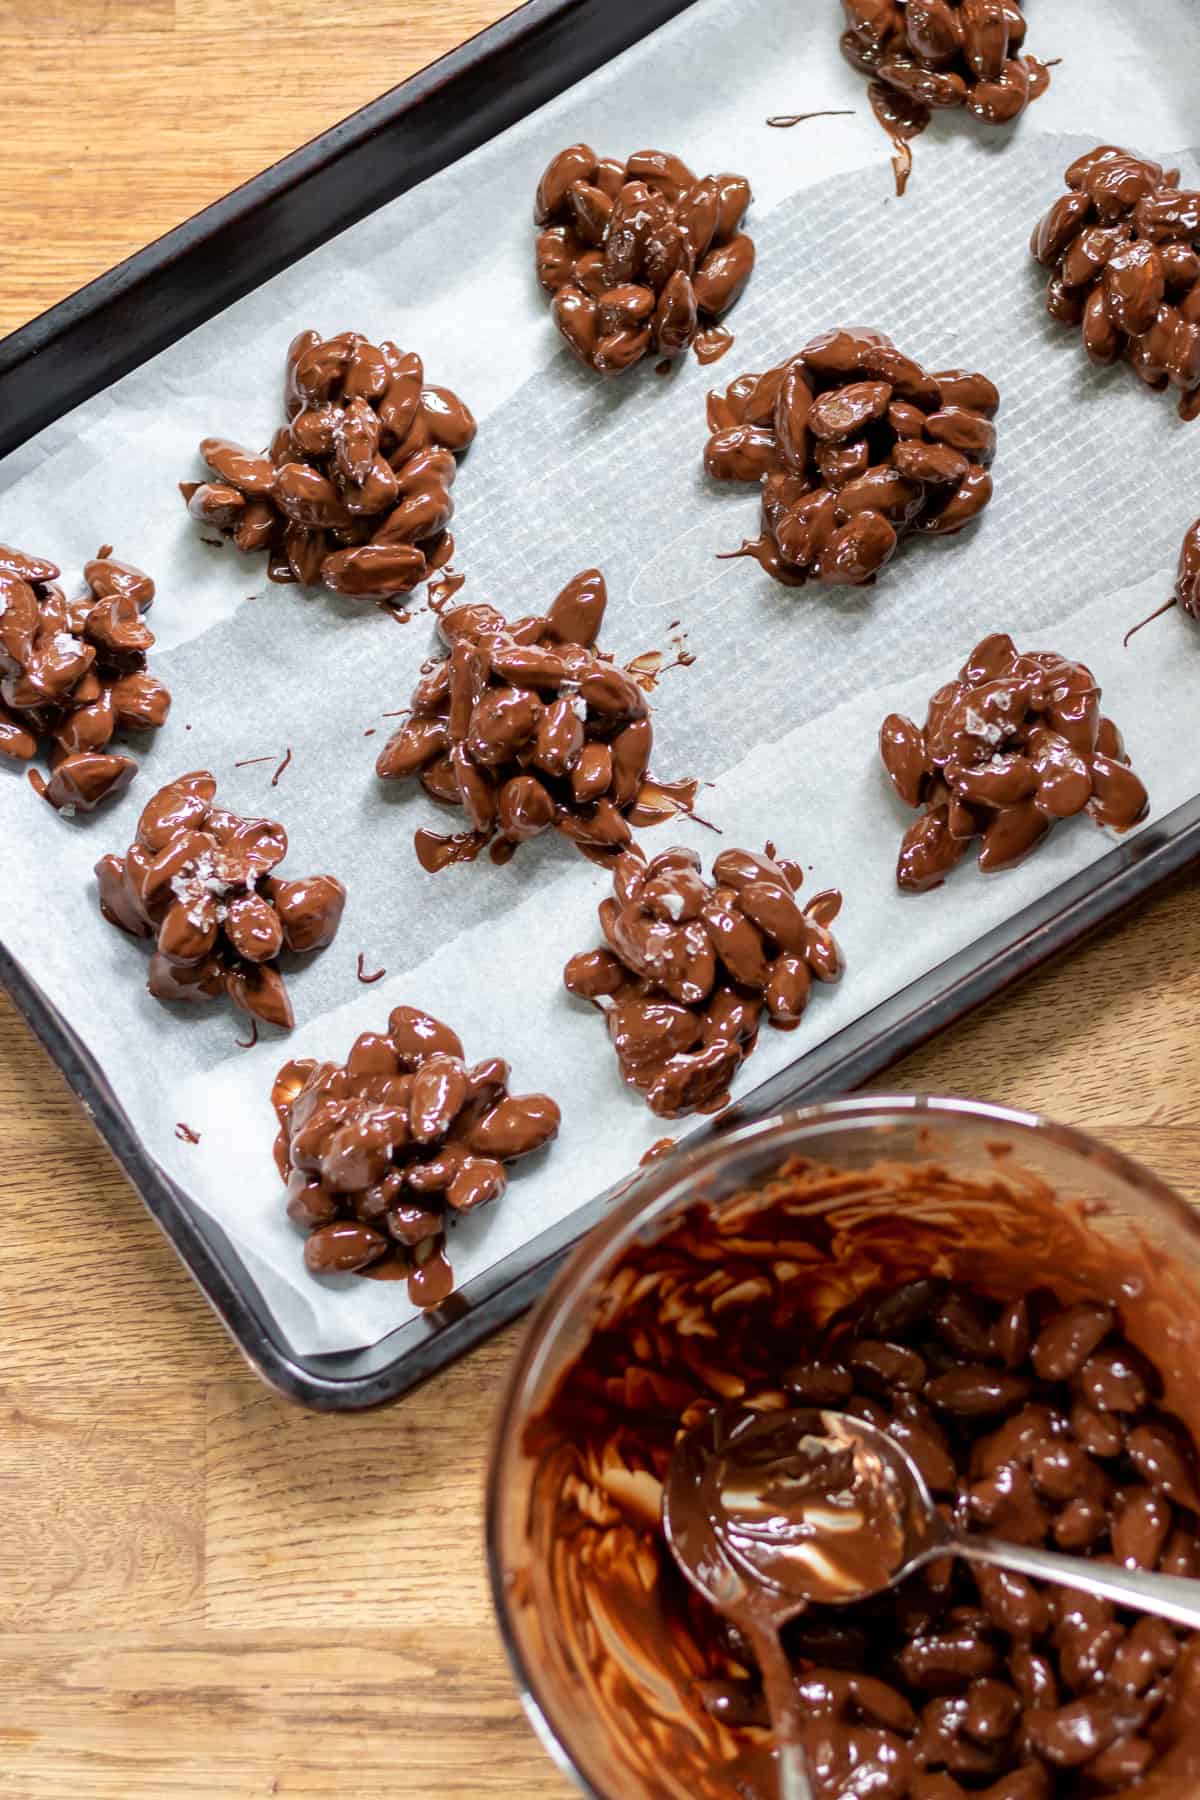 Making chocolate almond clusters.